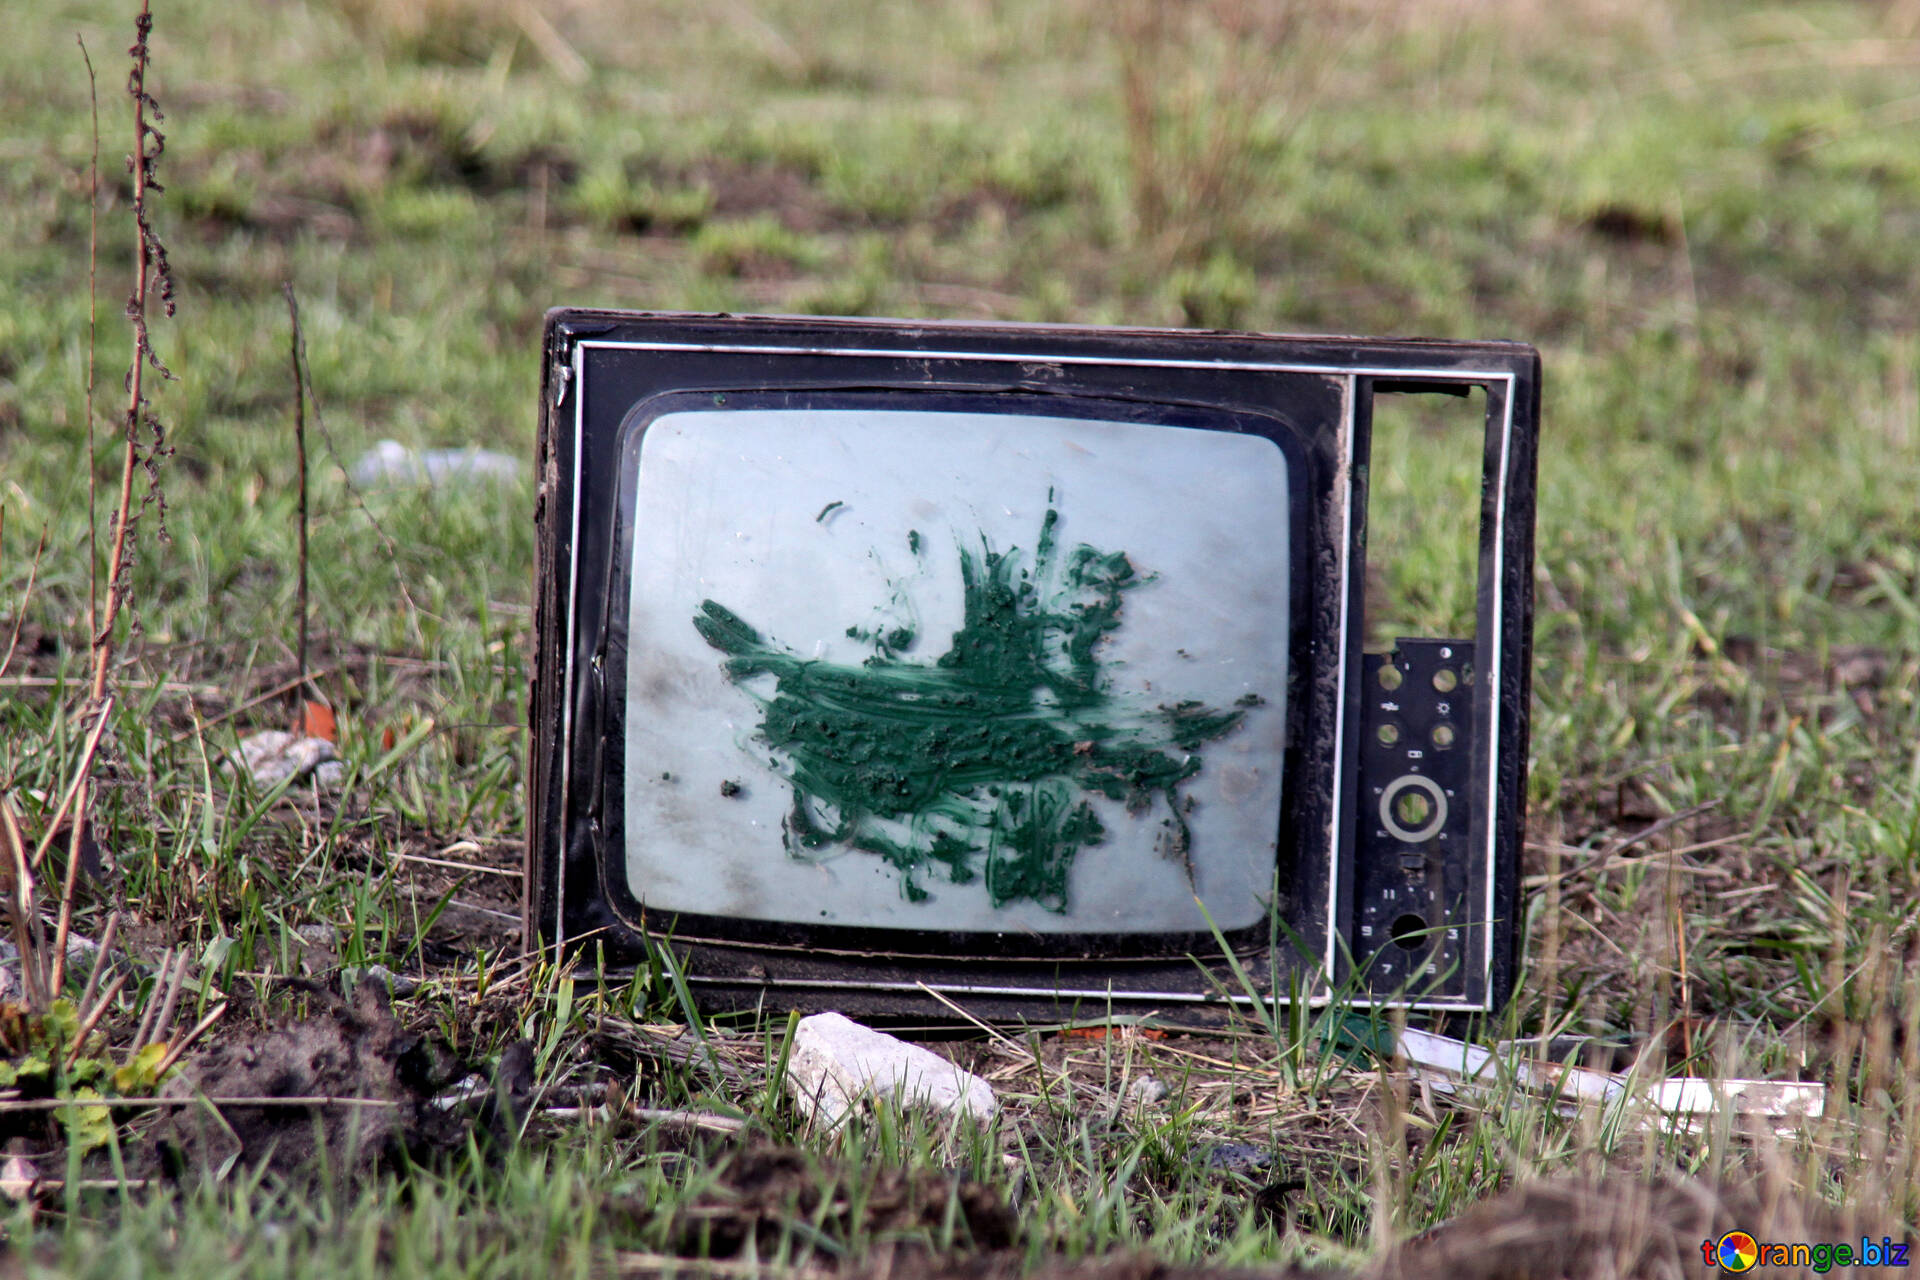 Free picture (Old TV) from https://torange.biz/old-tv-3495